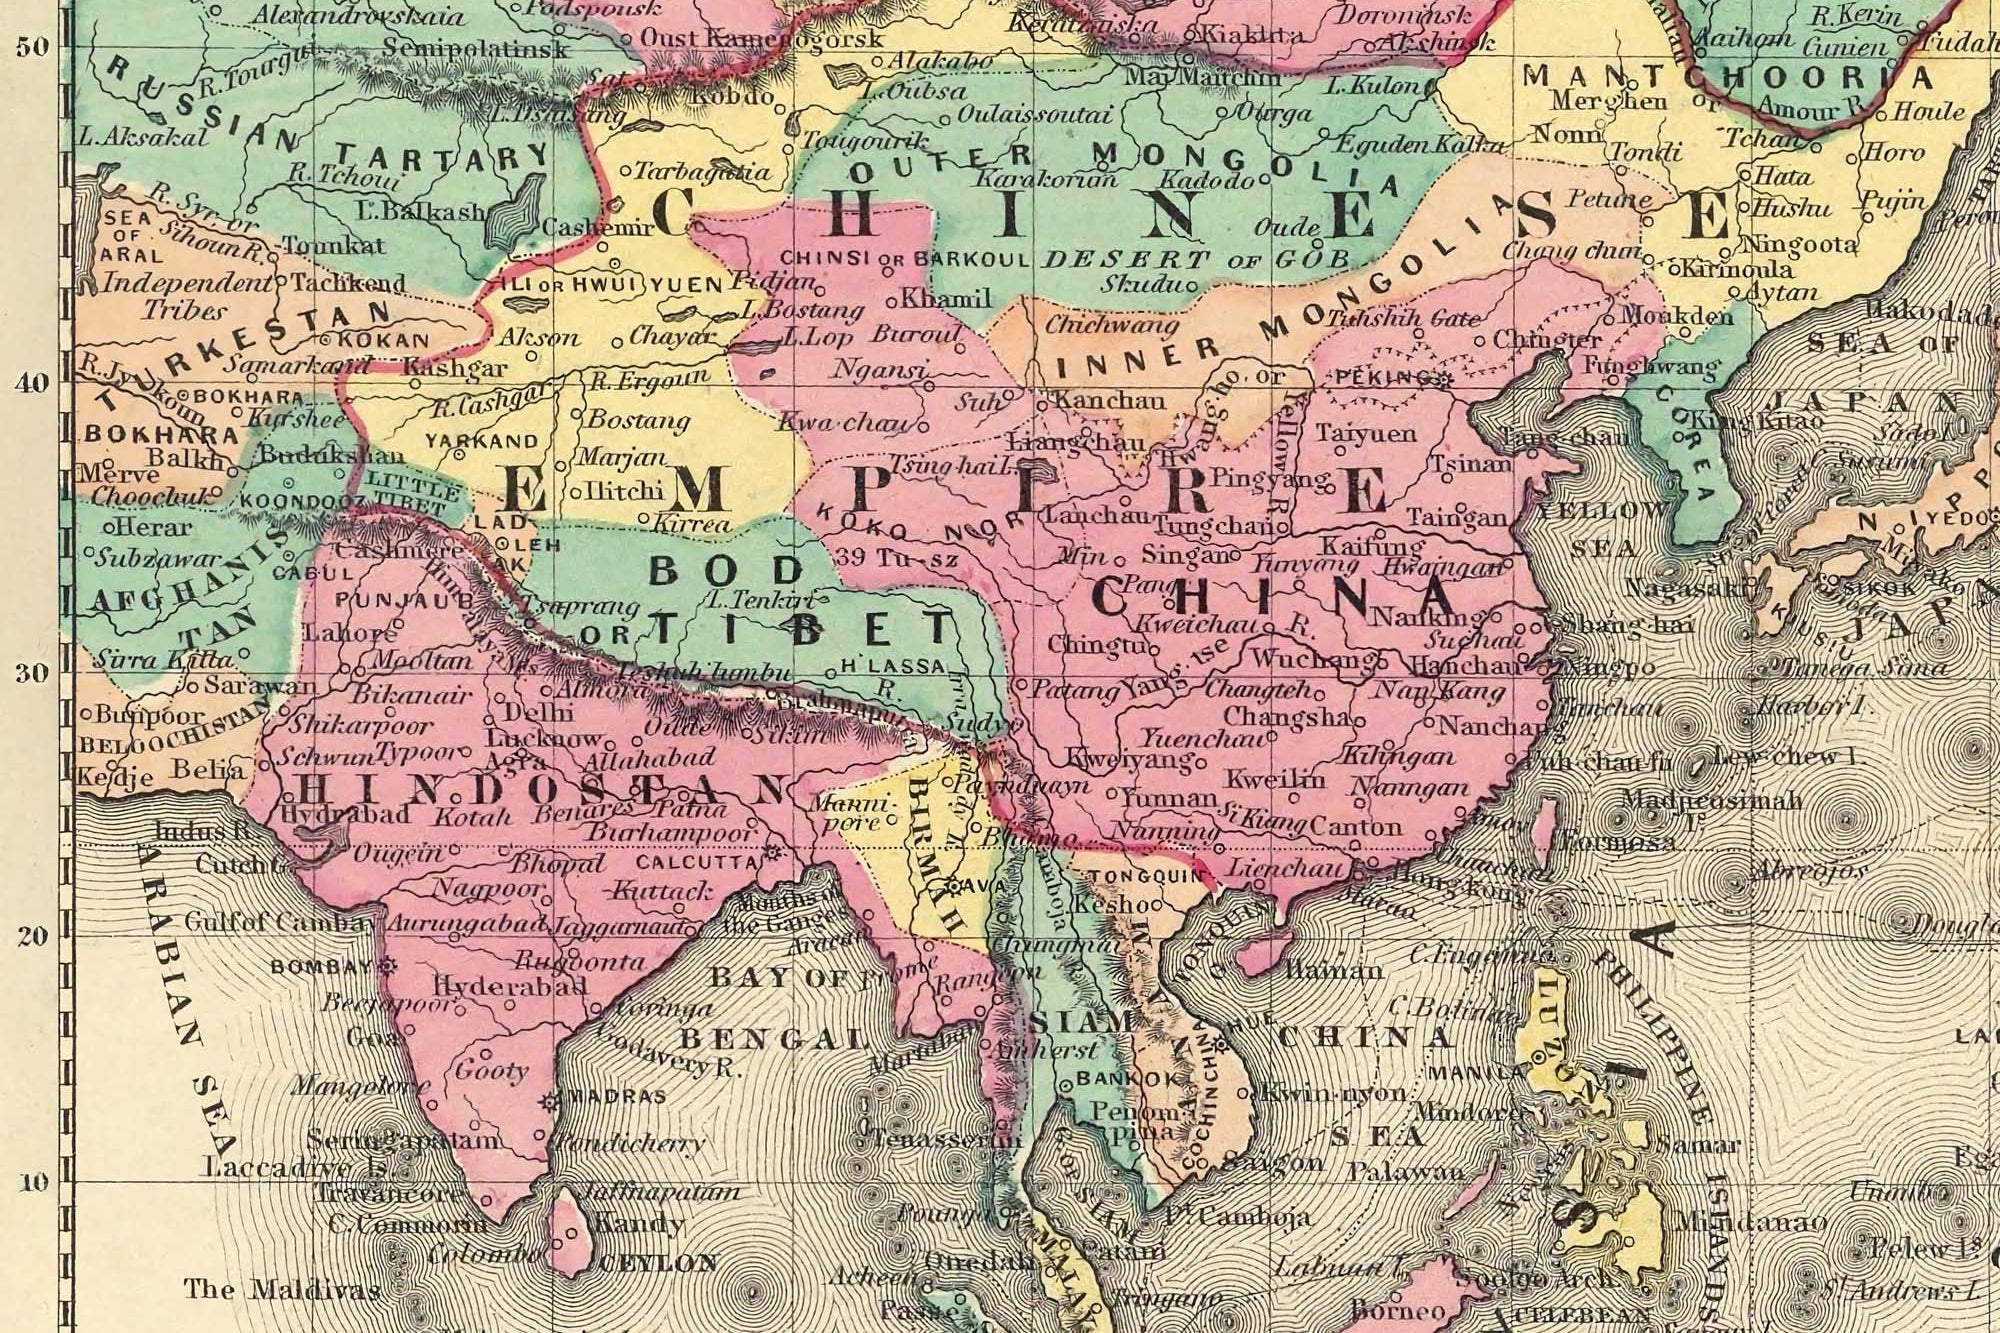 historical map of asia in 1800s